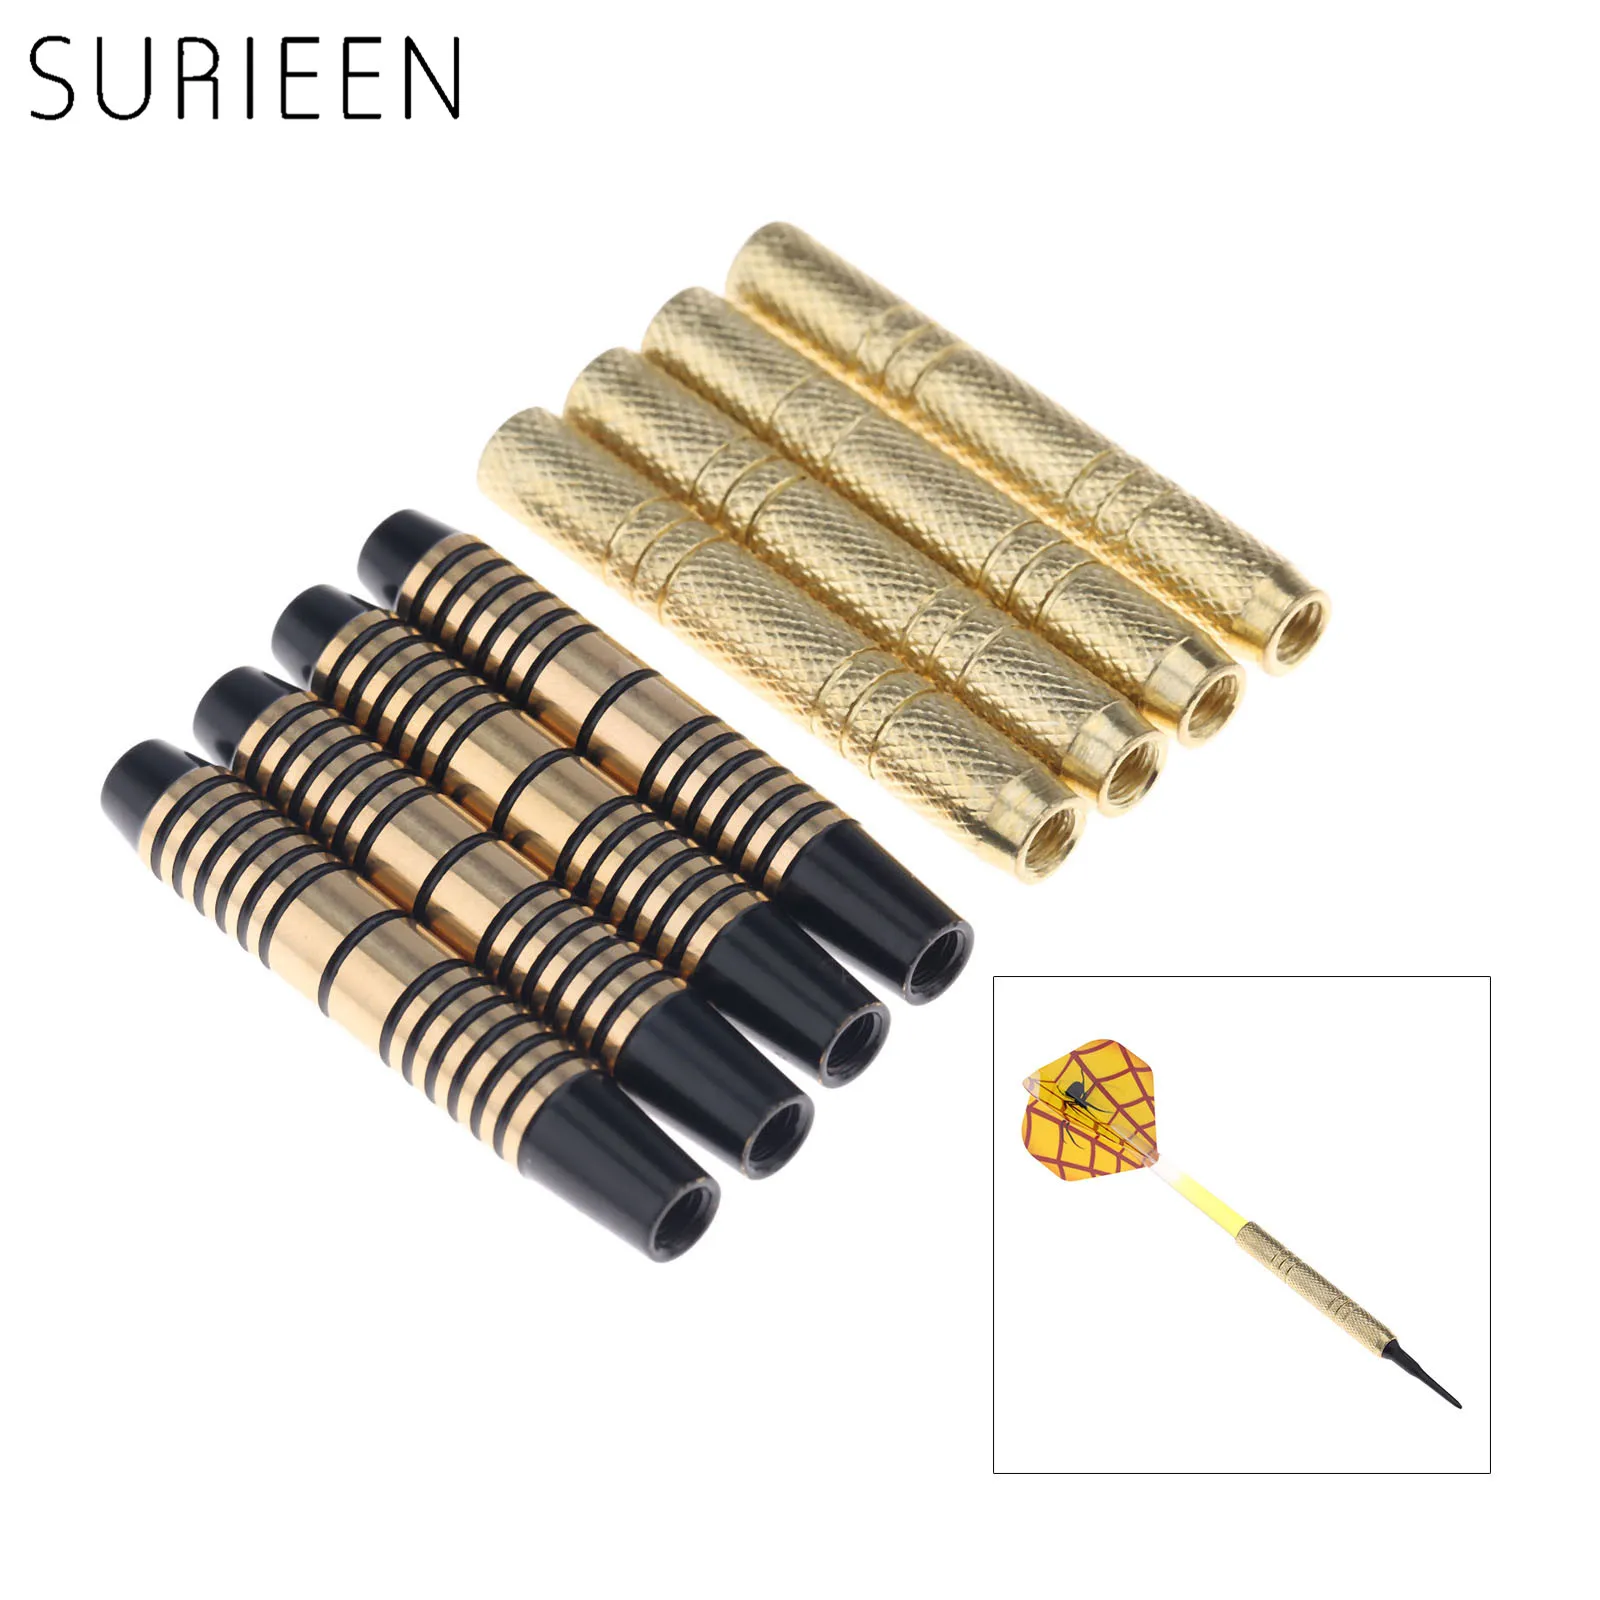 SURIEEN 4 pieces Professional Copper Dart Barrel for Nylon/Steel darts tip Dart Accessories 47mm-12g / 49mm-16g with 2BA Thread bubble series 47mm floating tourbillon mechanical watch with fashionable and waterproof god s perspective